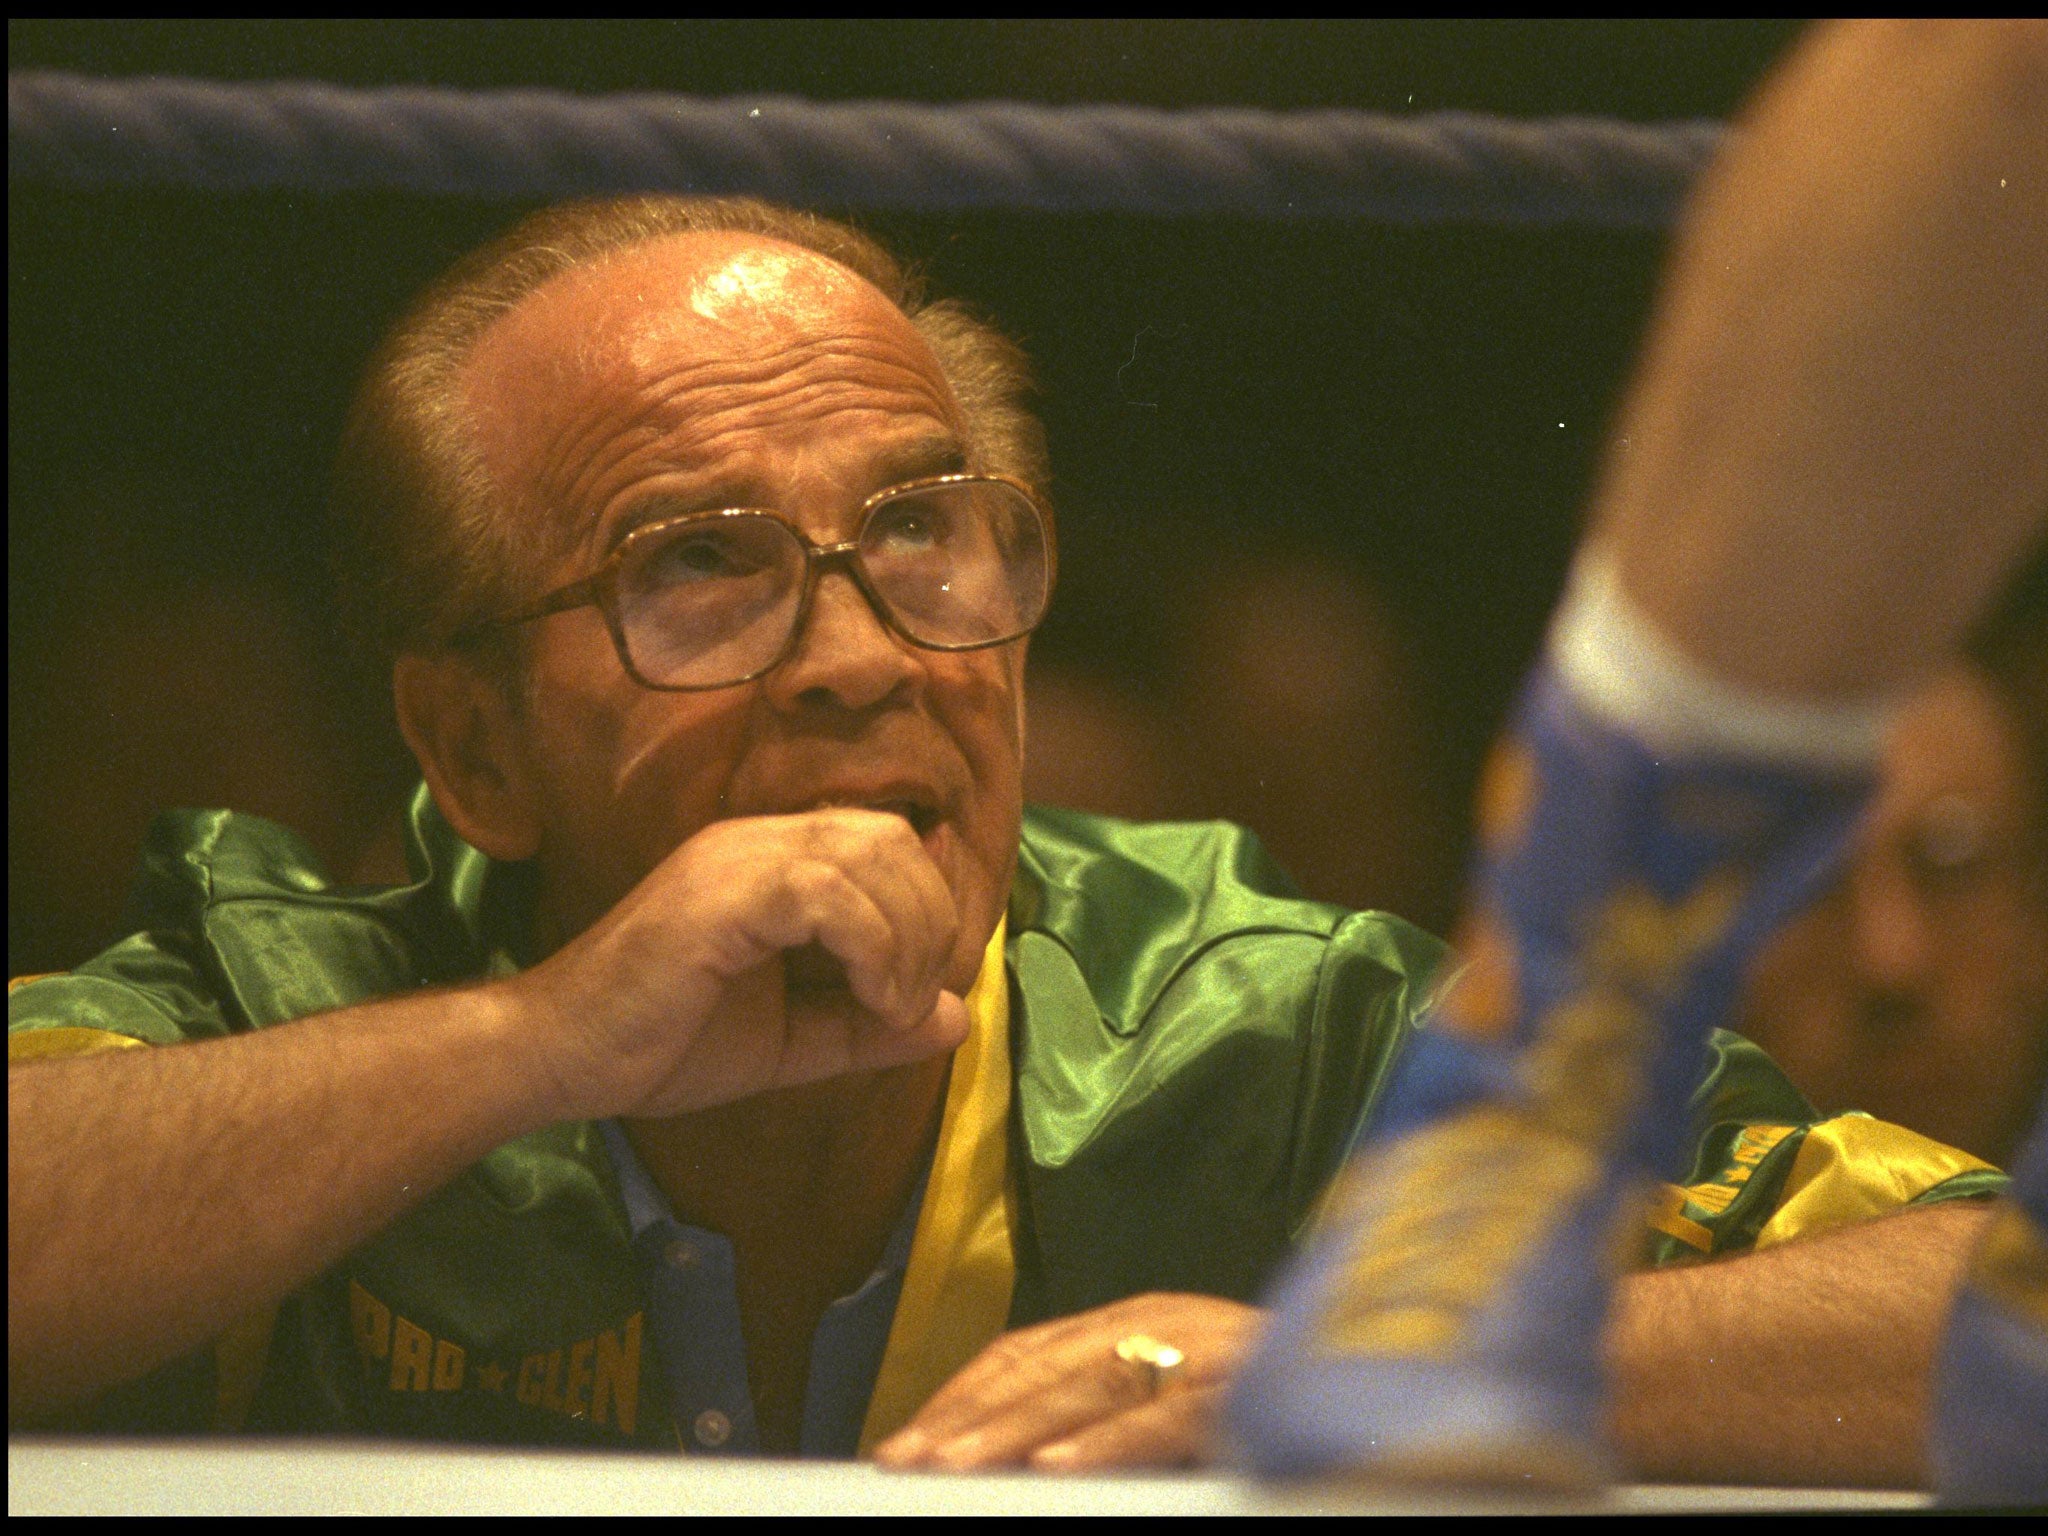 Duff at ringside in 1990: the dominance of his cartel was finally broken by the emergence of Frank Warren